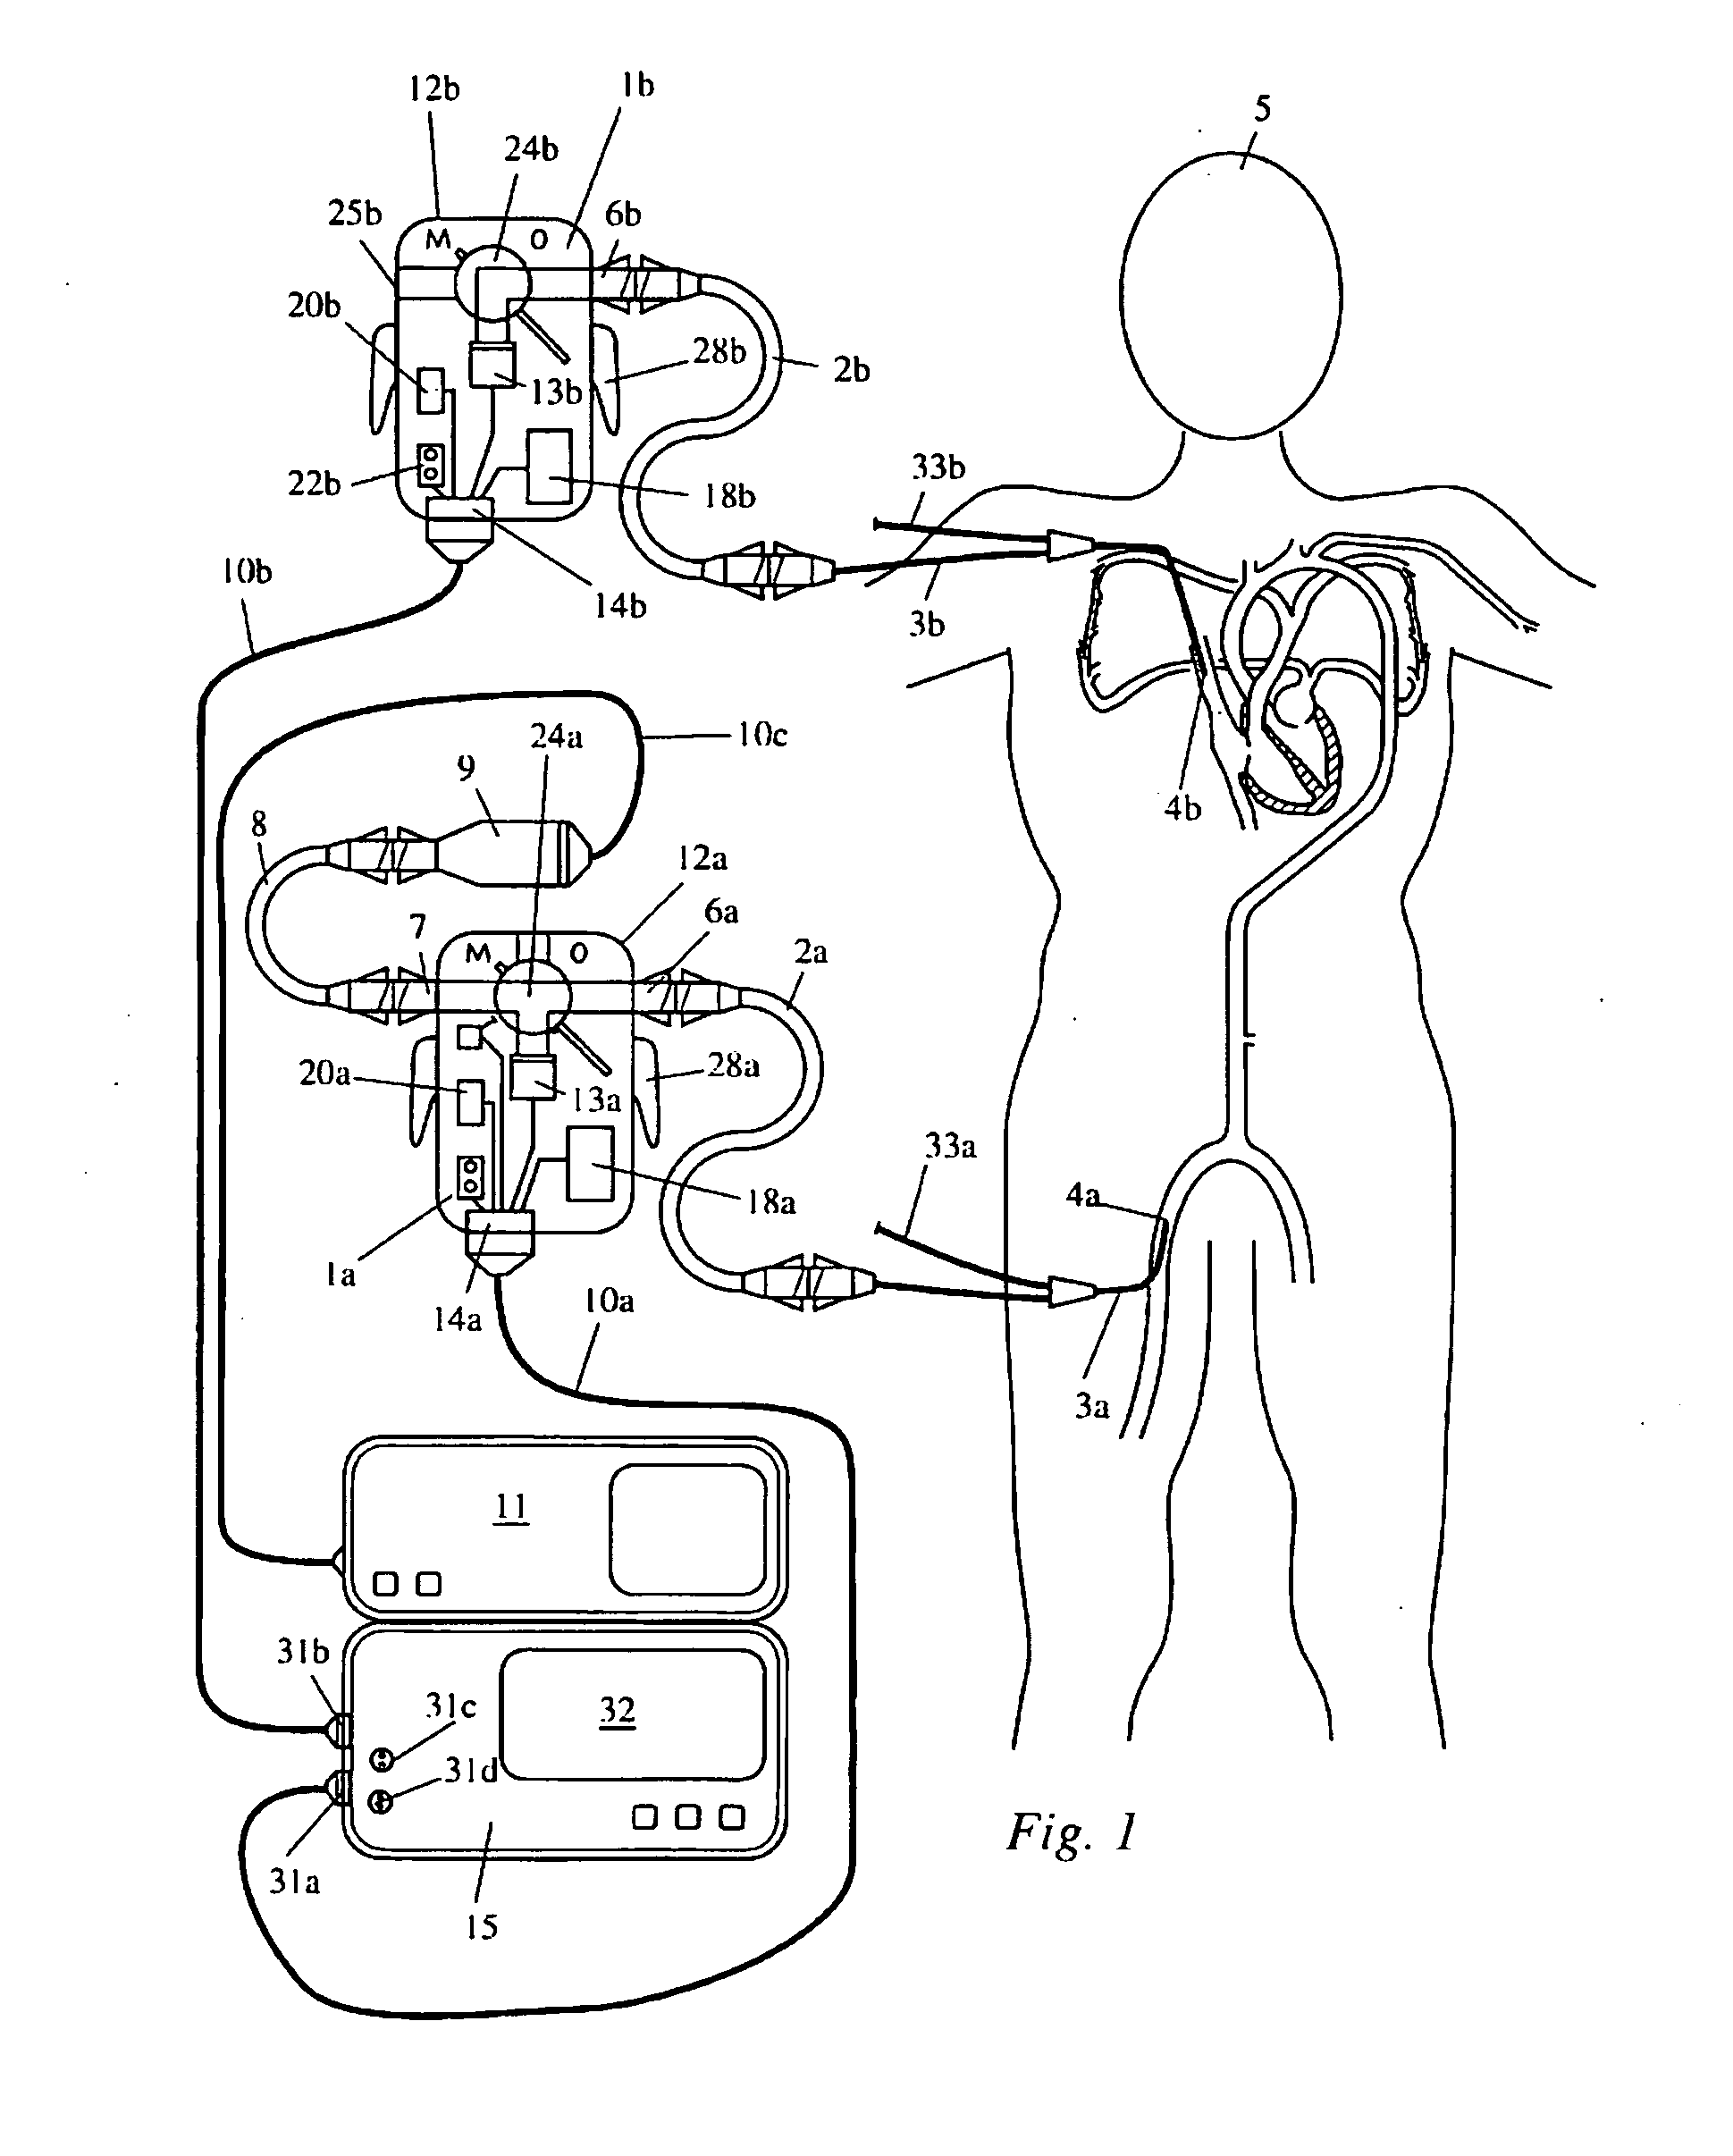 Portable sensor device and patient monitor